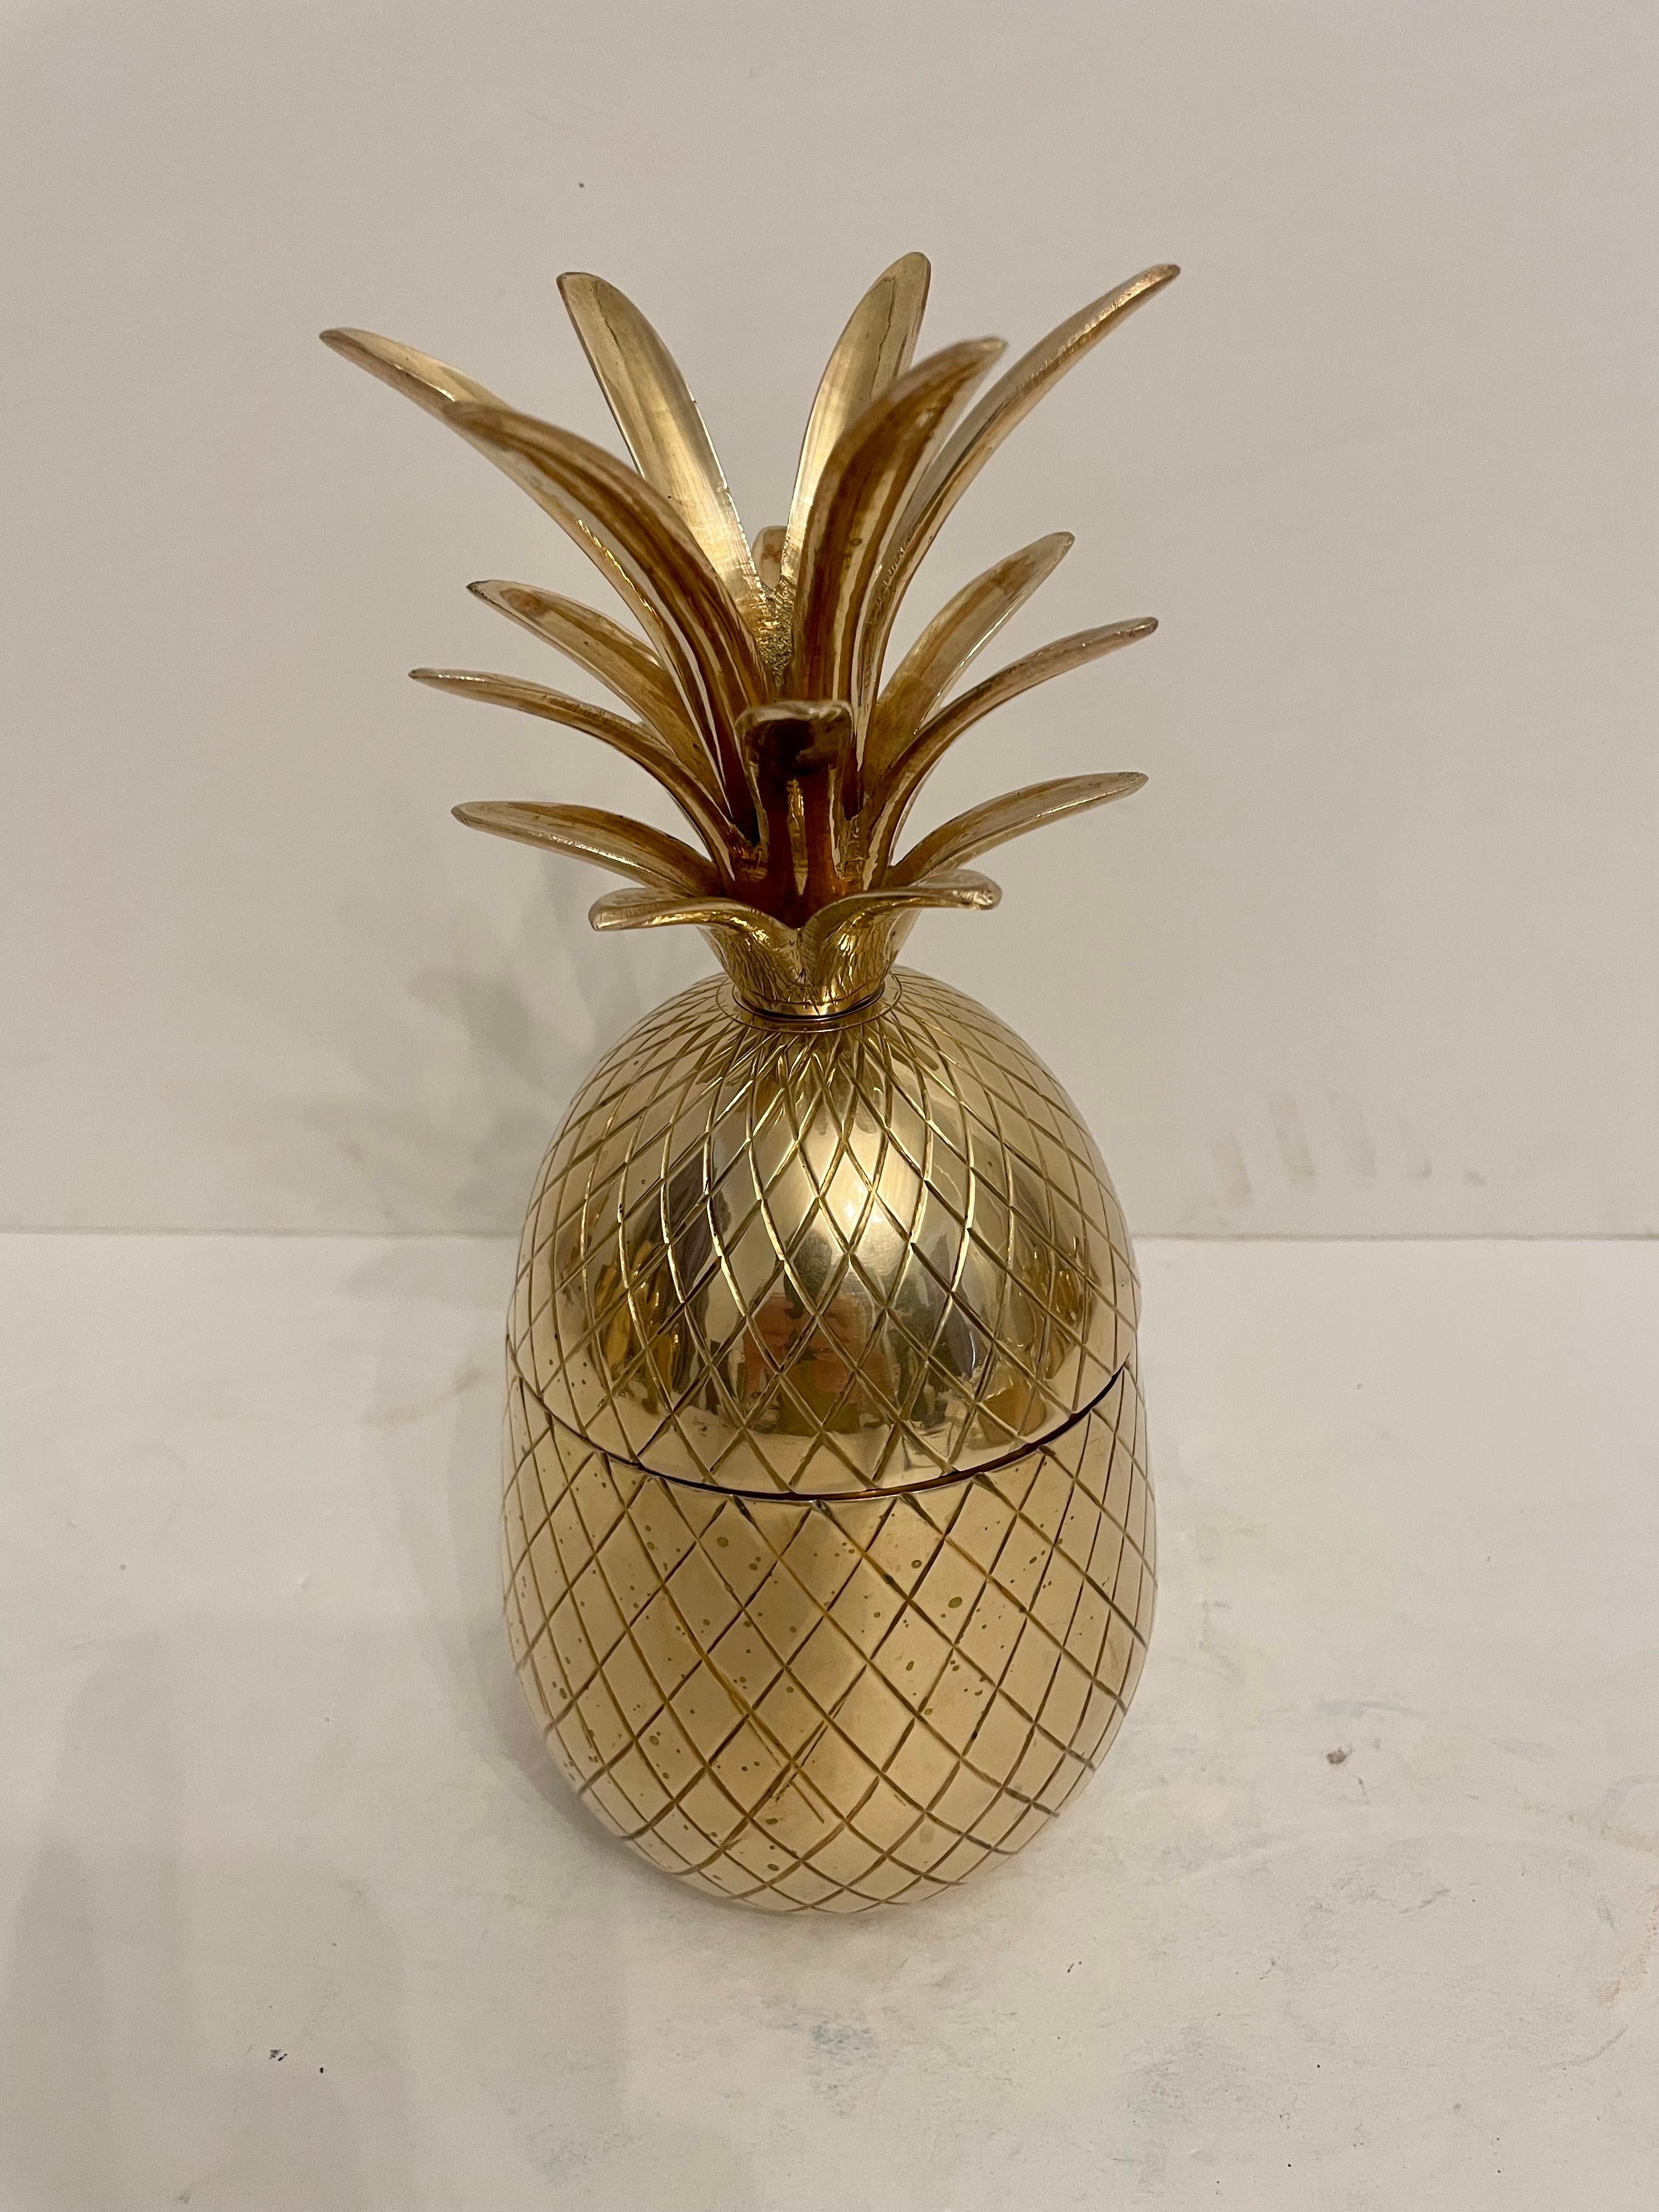 Brass Pineapple Shaped Covered Container. Good overall condition. Any dark areas in photos is reflection.  Hand polished. 9.75” tall x 4.5” diameter. Any dark spots are shadows from light.